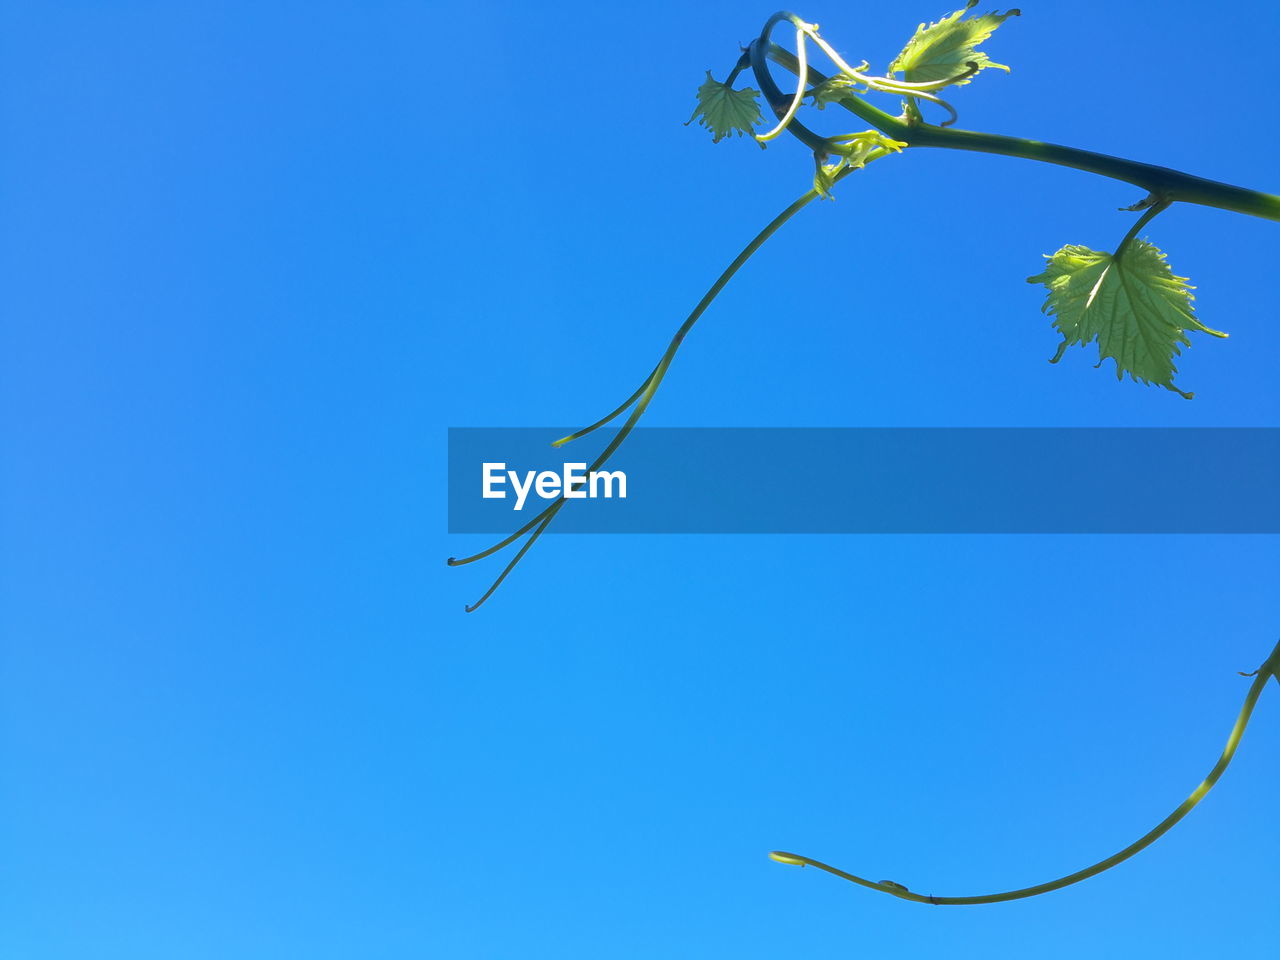 LOW ANGLE VIEW OF TREE BRANCH AGAINST BLUE SKY